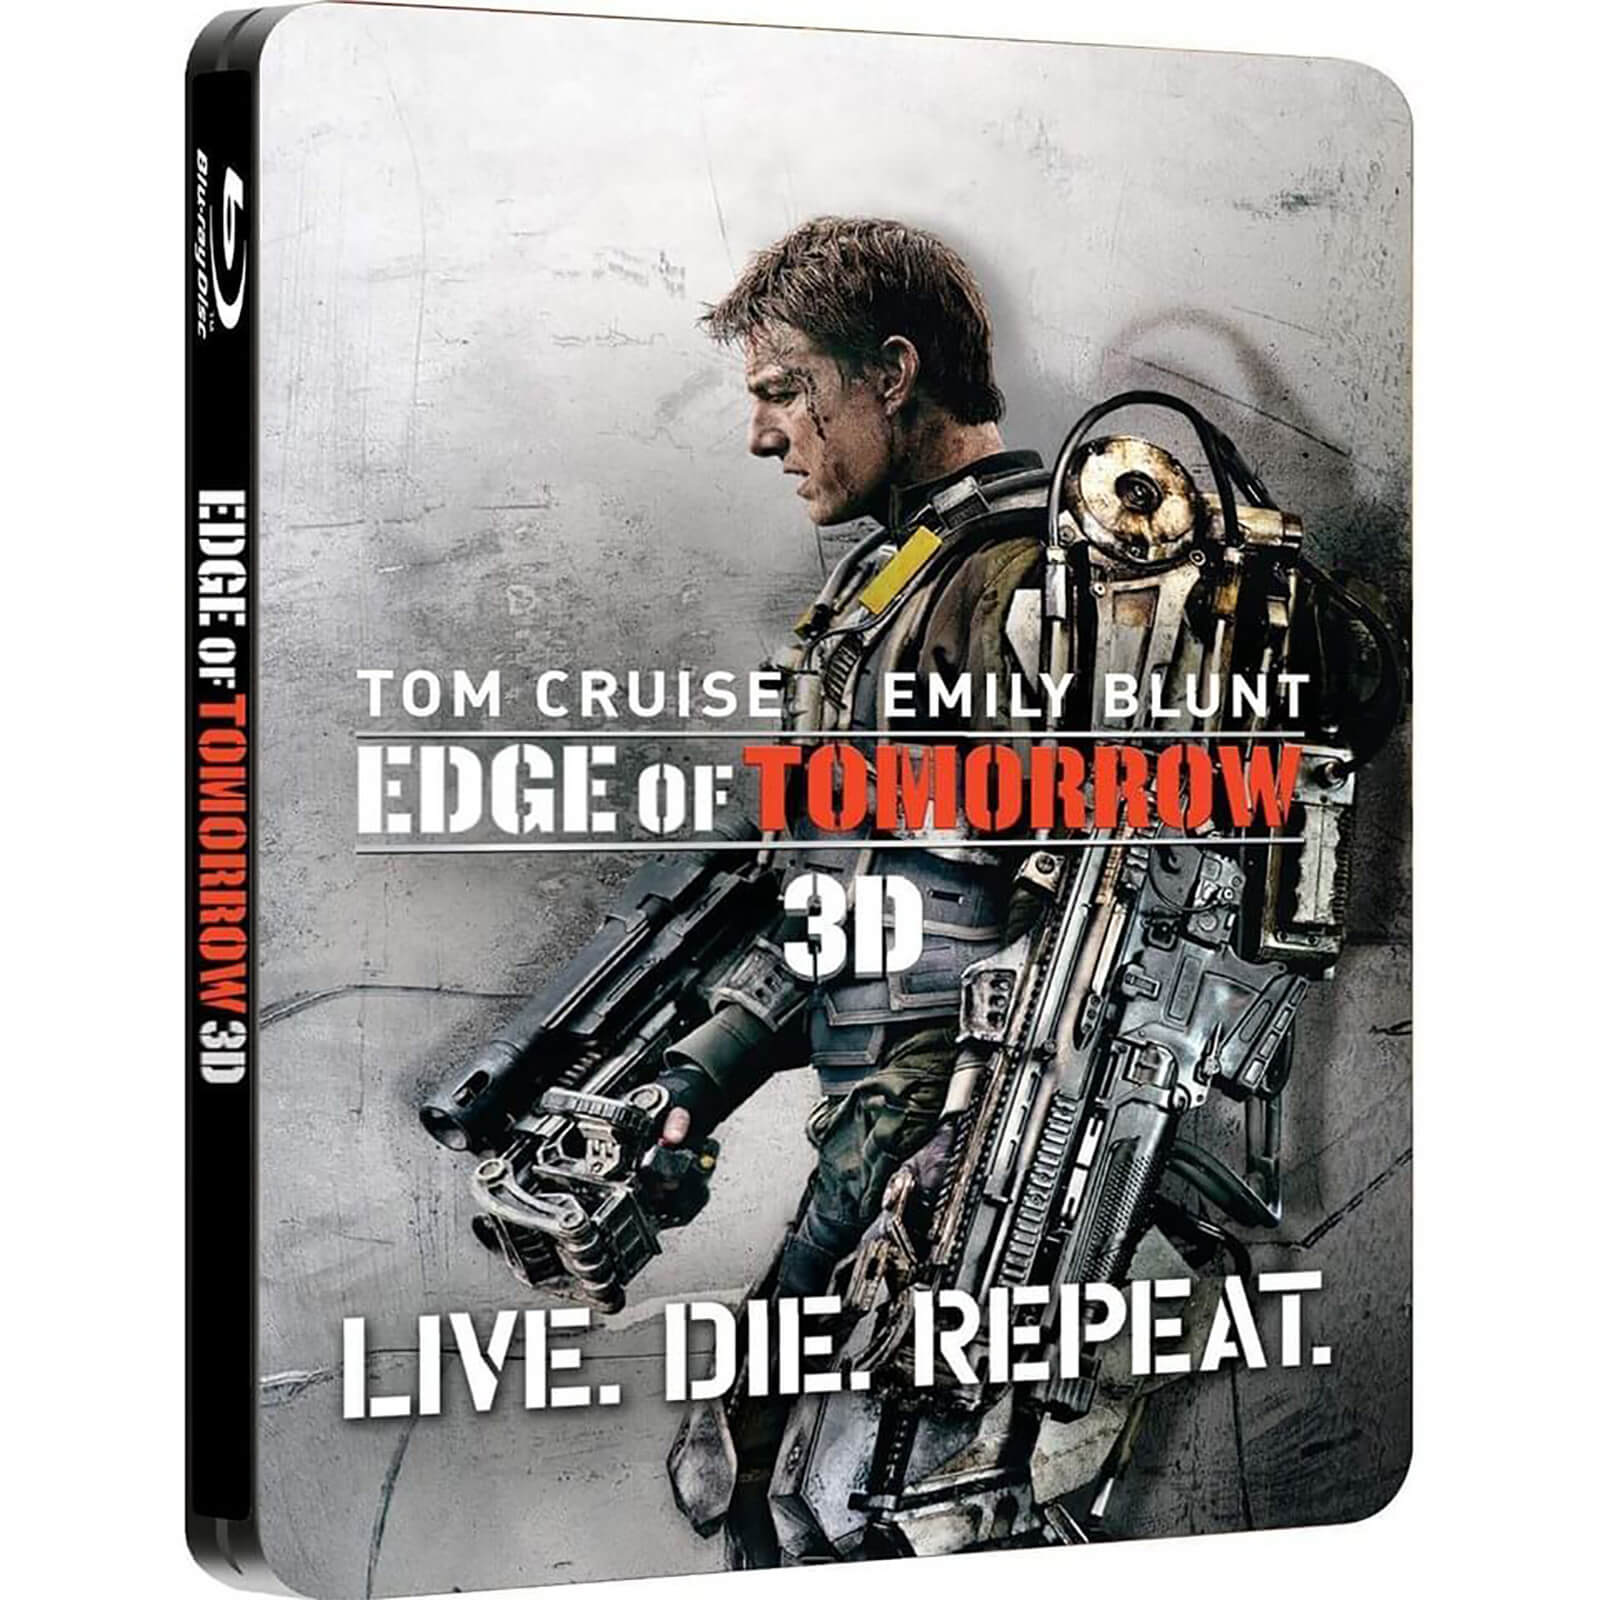 Edge of Tomorrow 3D - Limited Edition Steelbook